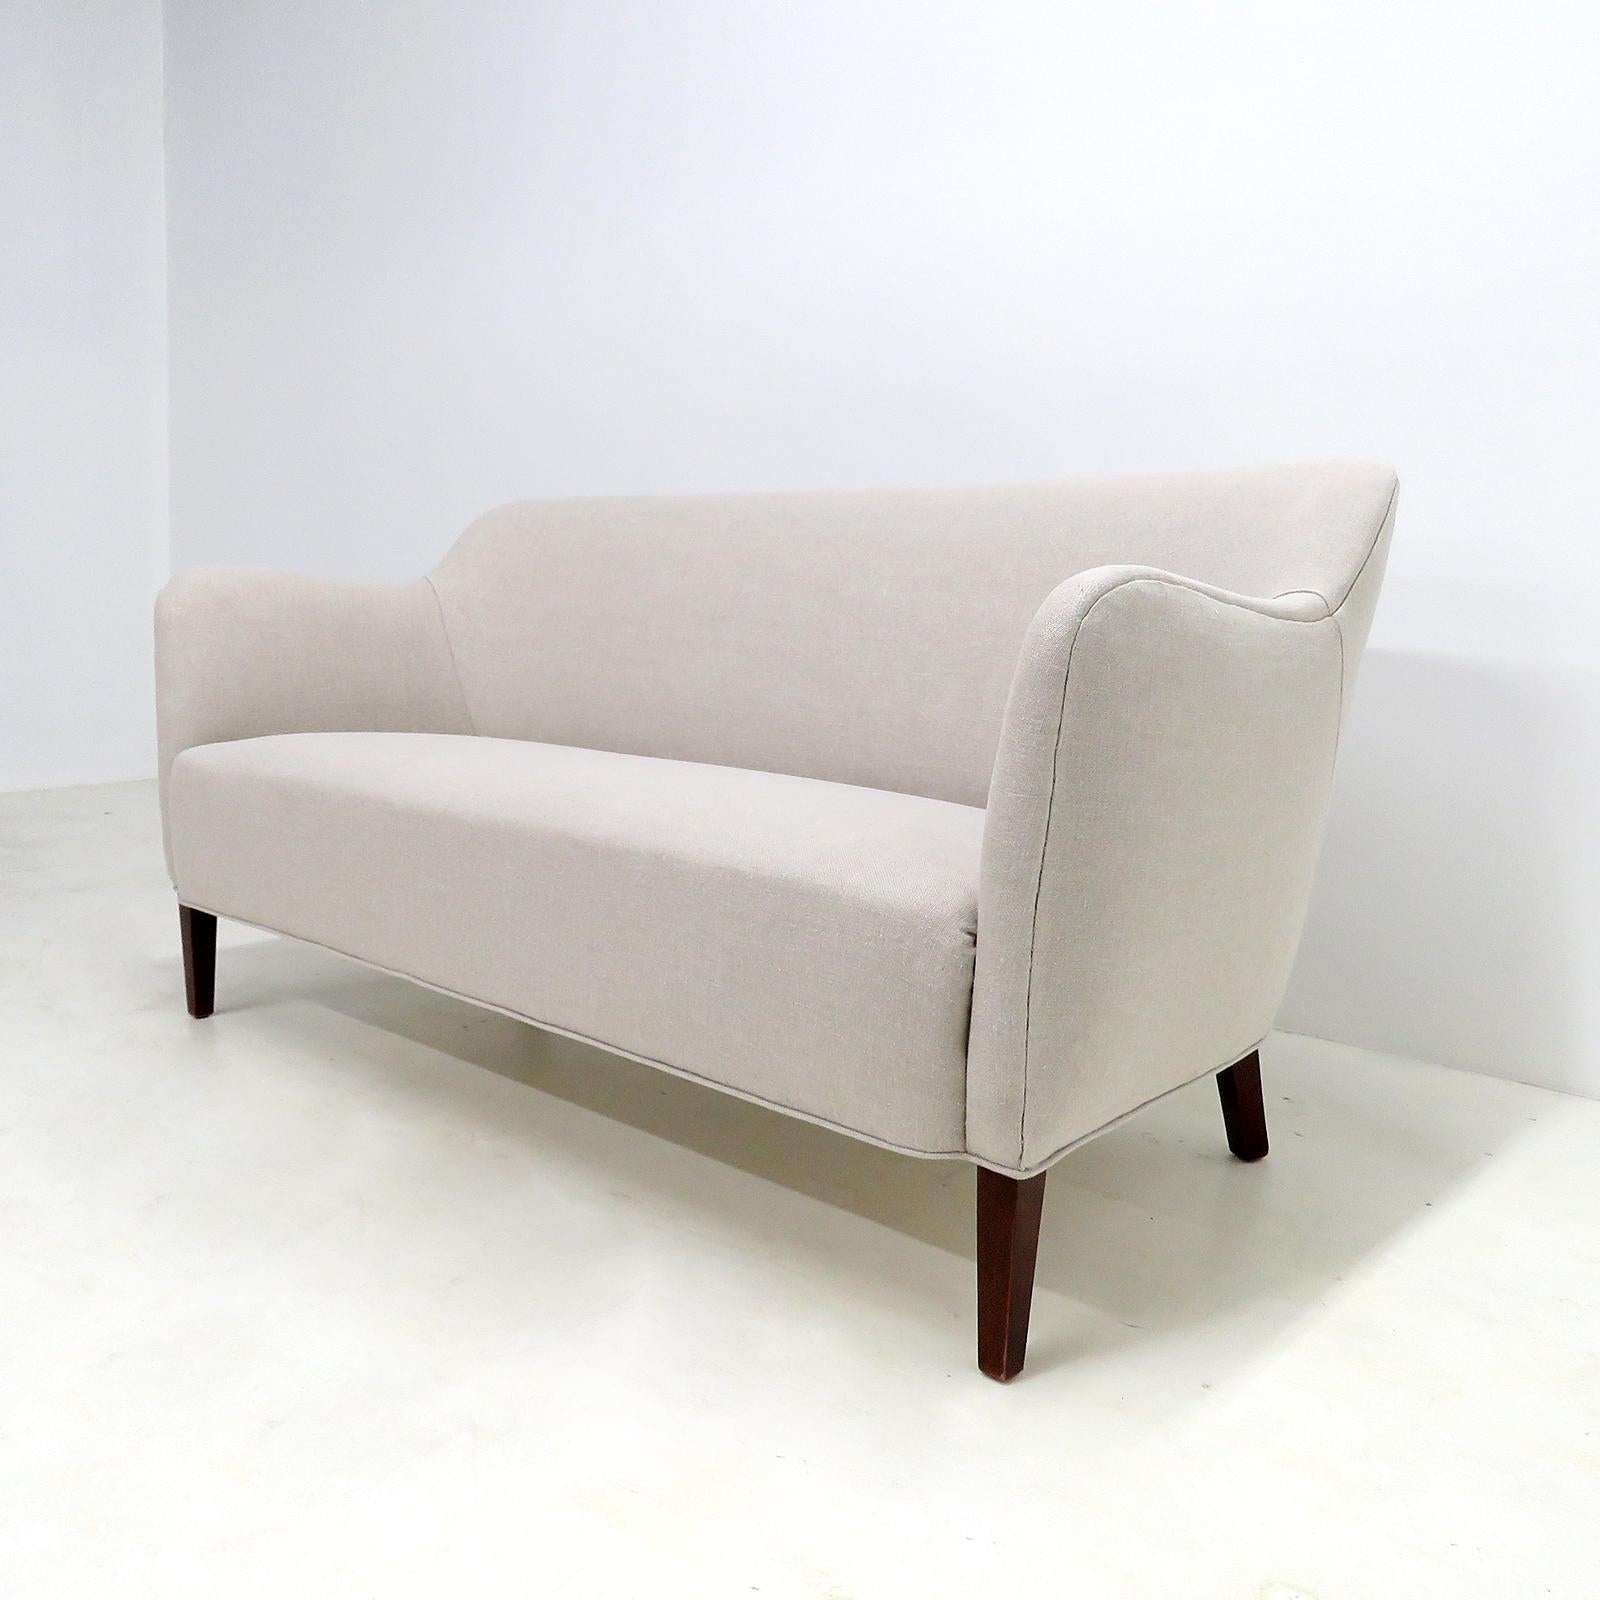 Danish Modern Settee by Jacob Kjaer, 1940 In Good Condition For Sale In Los Angeles, CA